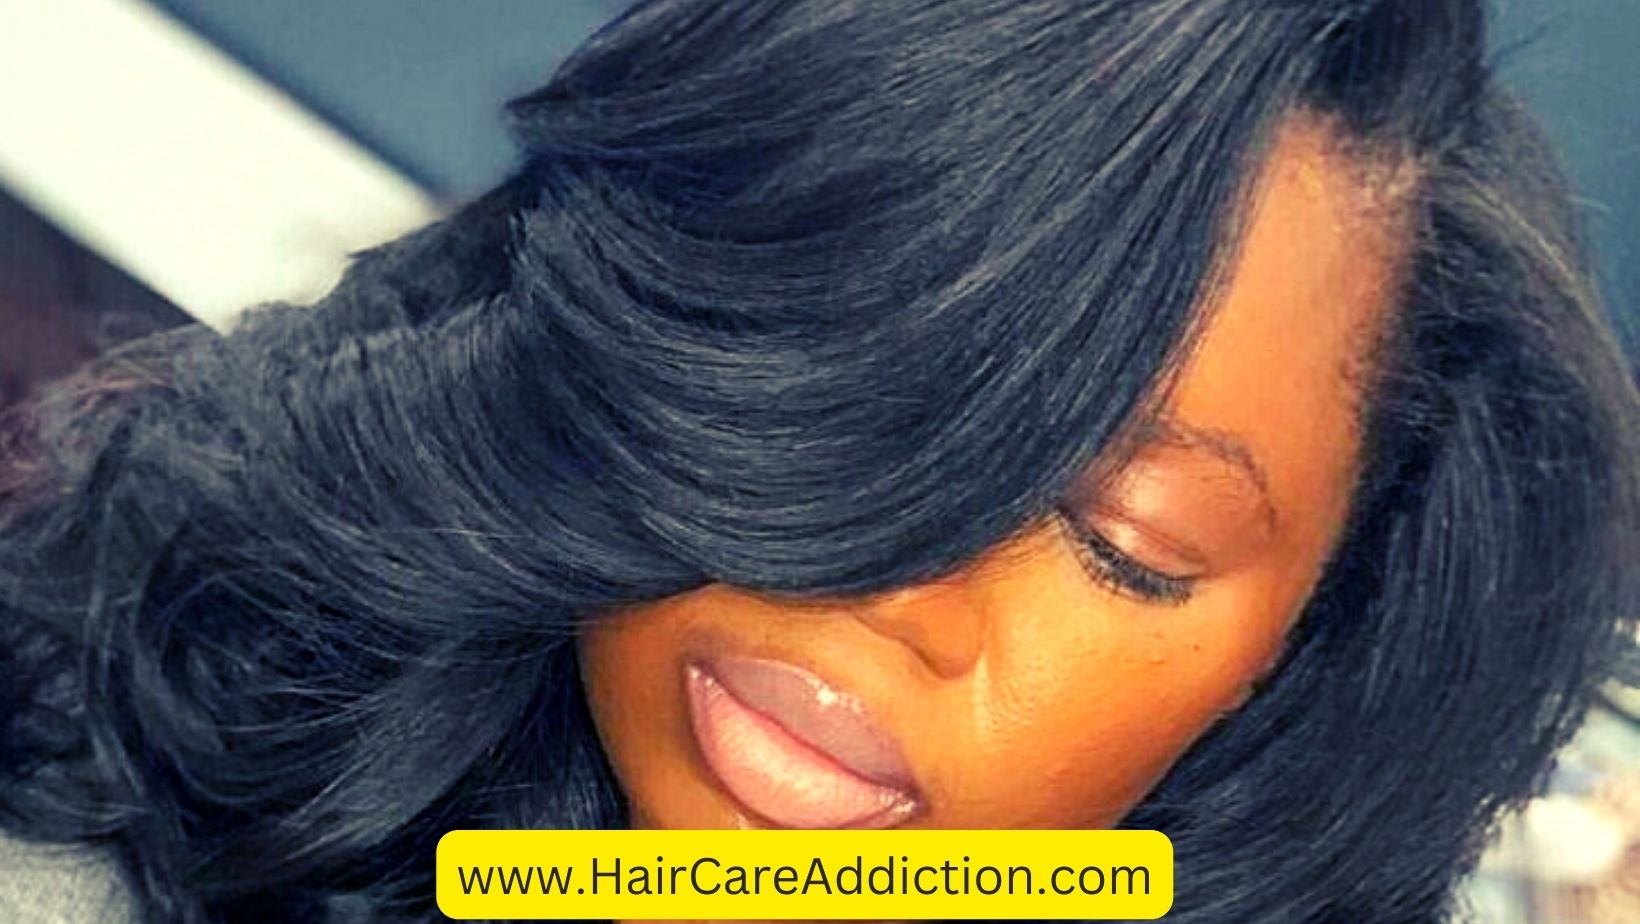 How to Relieve the Tightness of a Sew-In